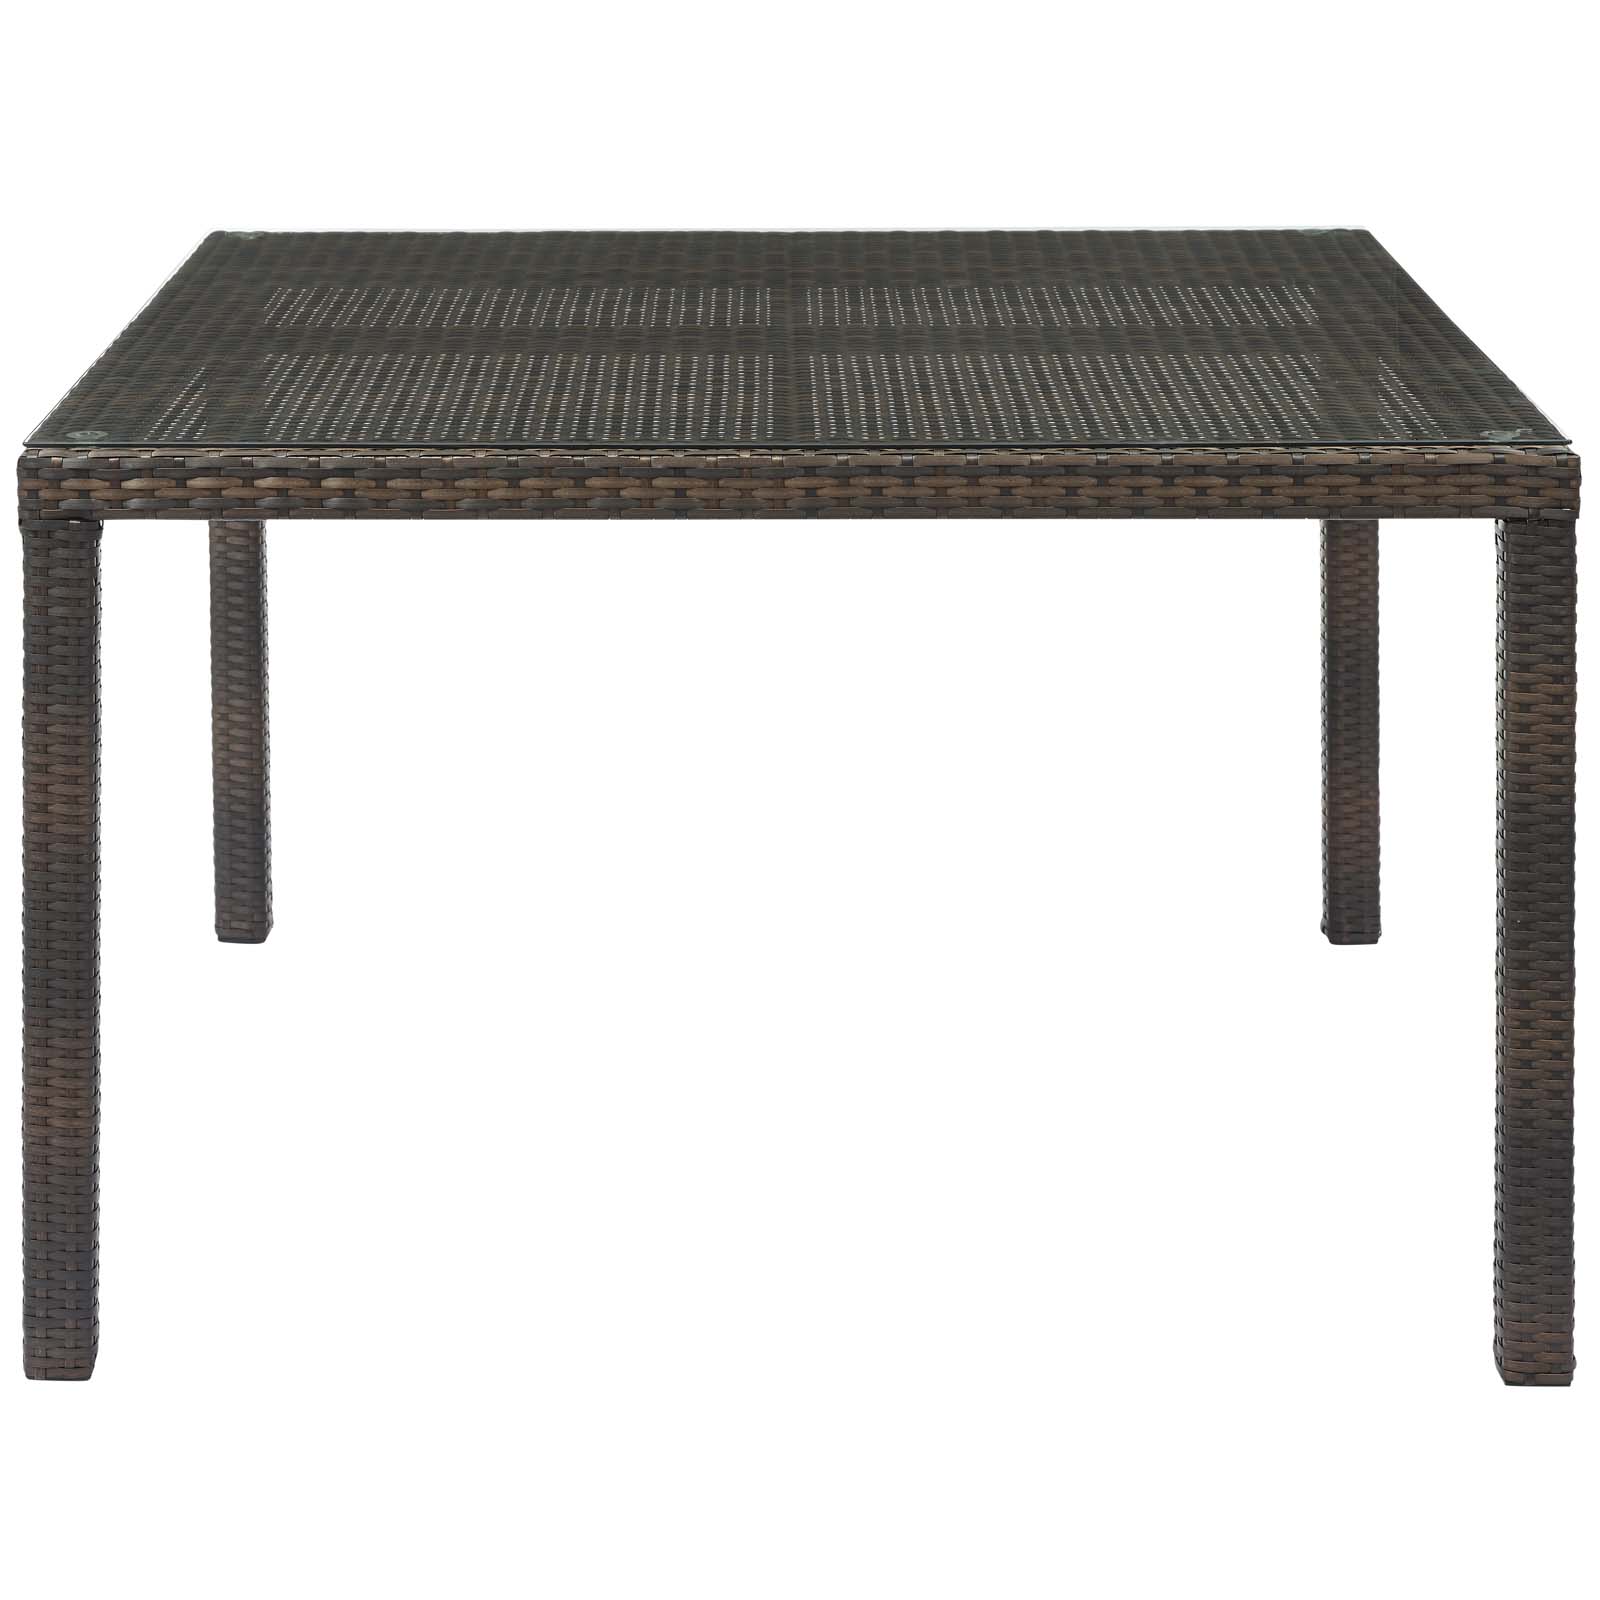 Modern Contemporary Urban Design Outdoor Patio Balcony Garden Furniture Lounge Dining Table, Rattan Wicker Glass, Brown - image 3 of 3